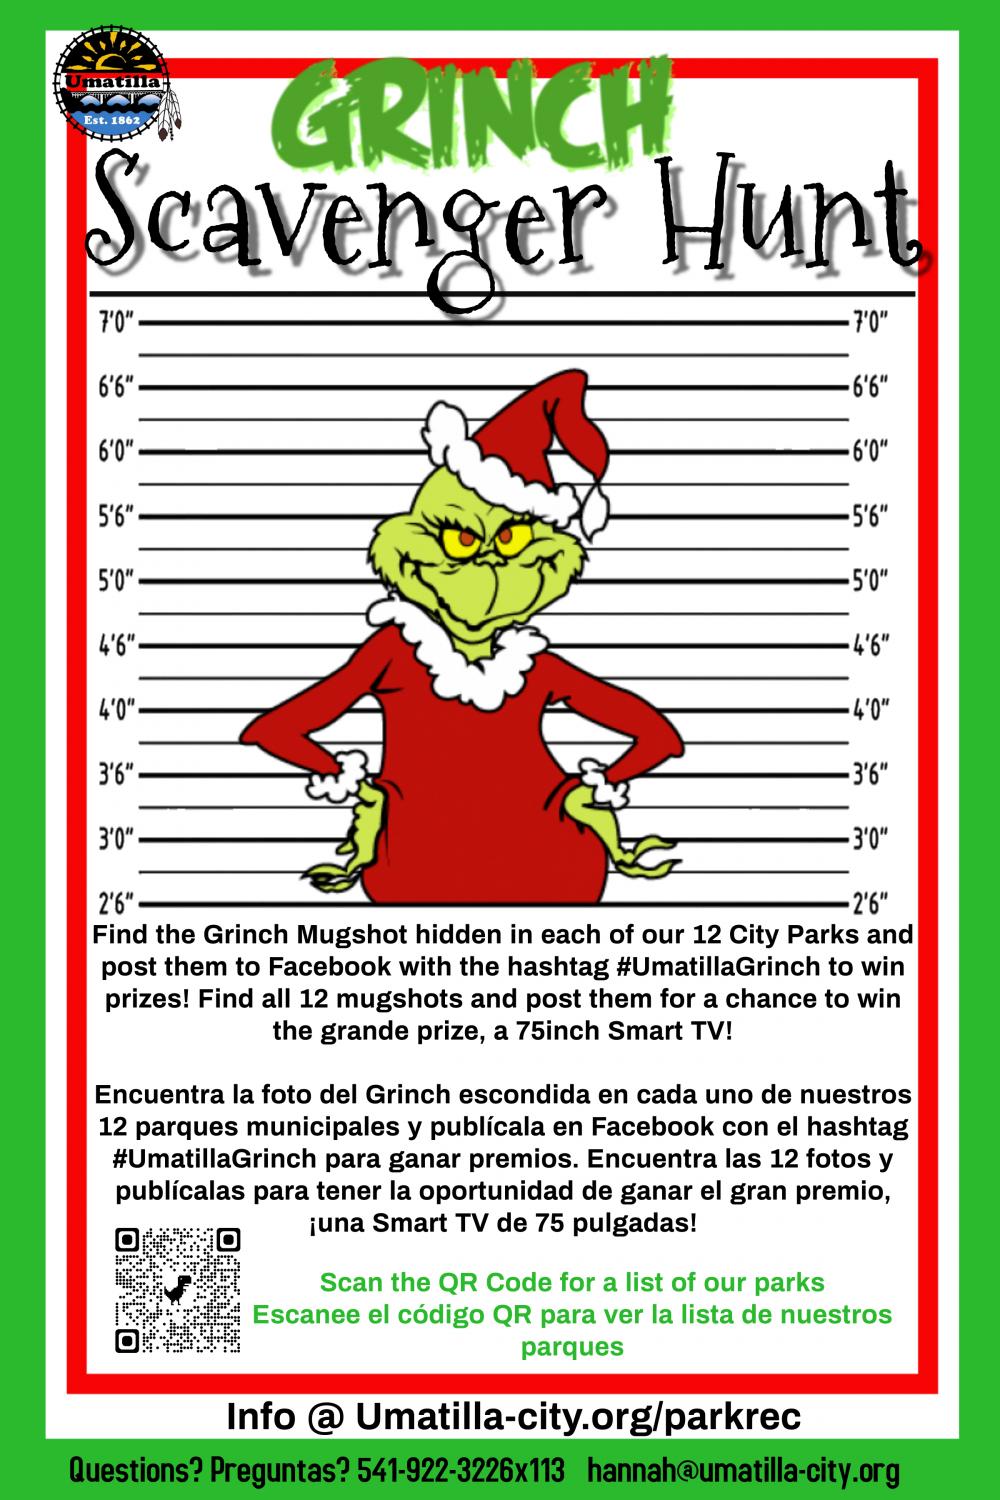 Grinch Day is December 1st! - News and Announcements 